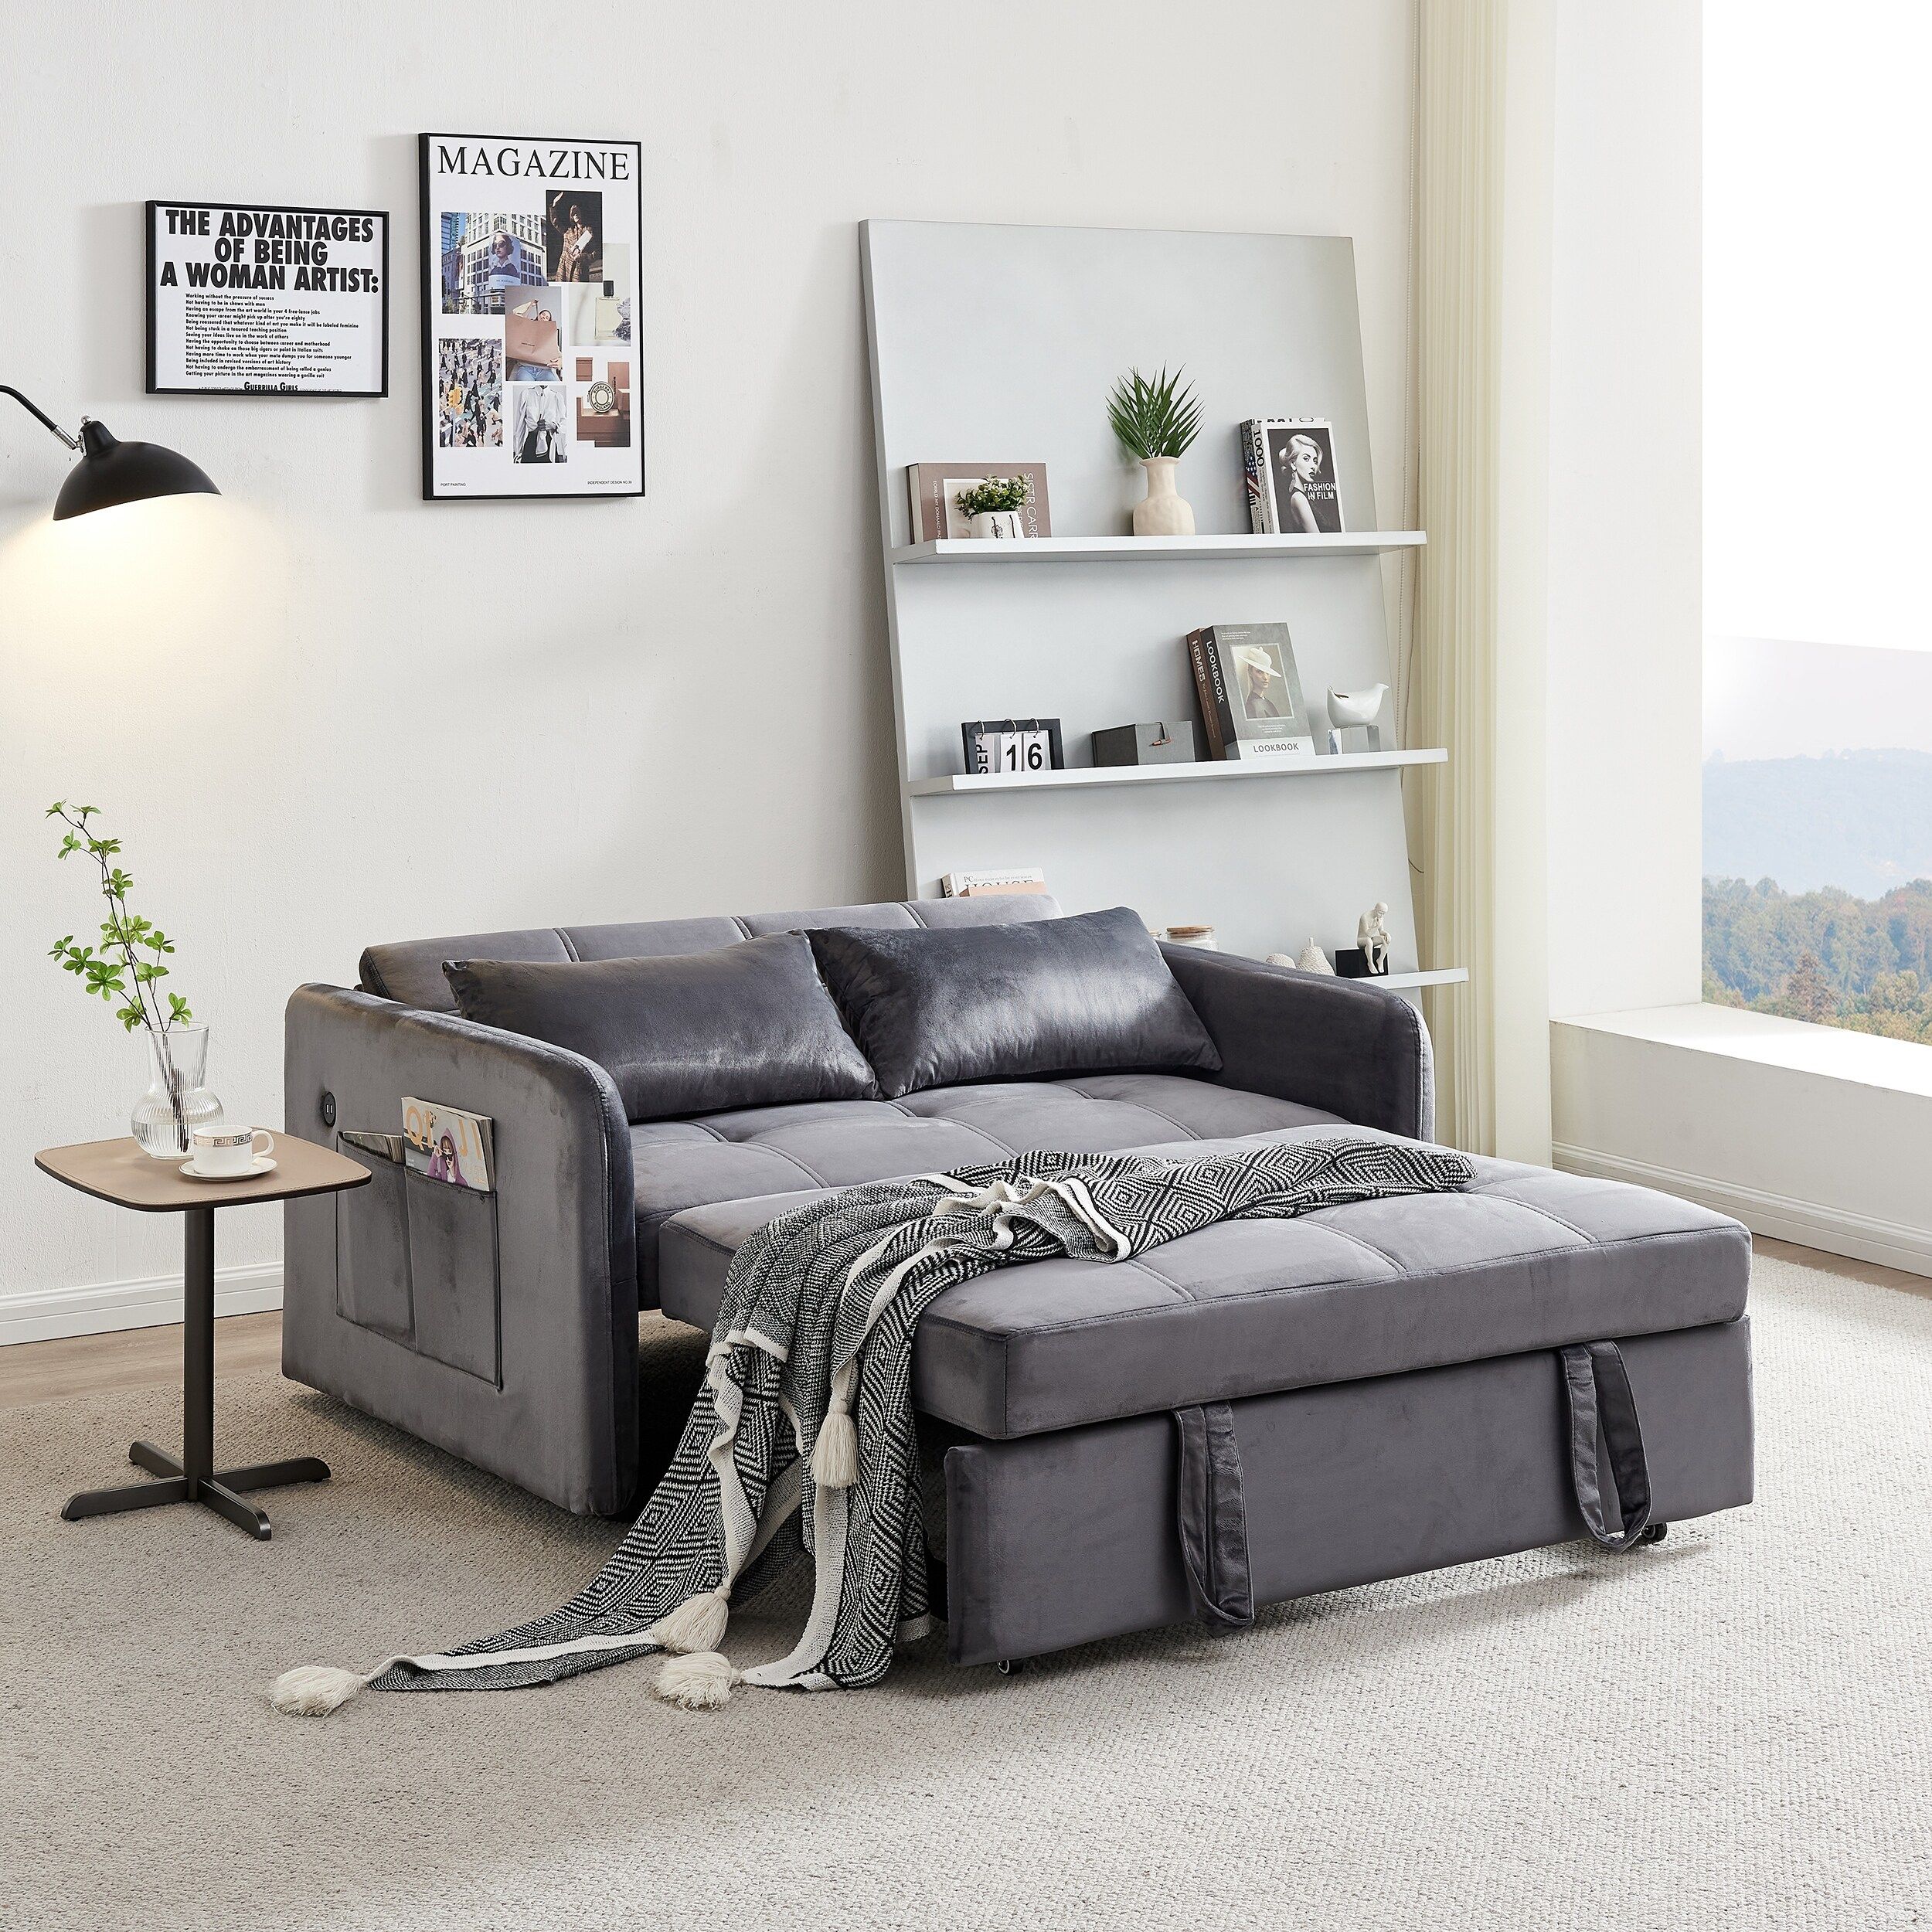 3 In 1 Multi Functional Sleeper Convertible Couch Pull Out Bed, Grey – Bed  Bath & Beyond – 39379966 In 3 In 1 Gray Pull Out Sleeper Sofas (View 14 of 15)